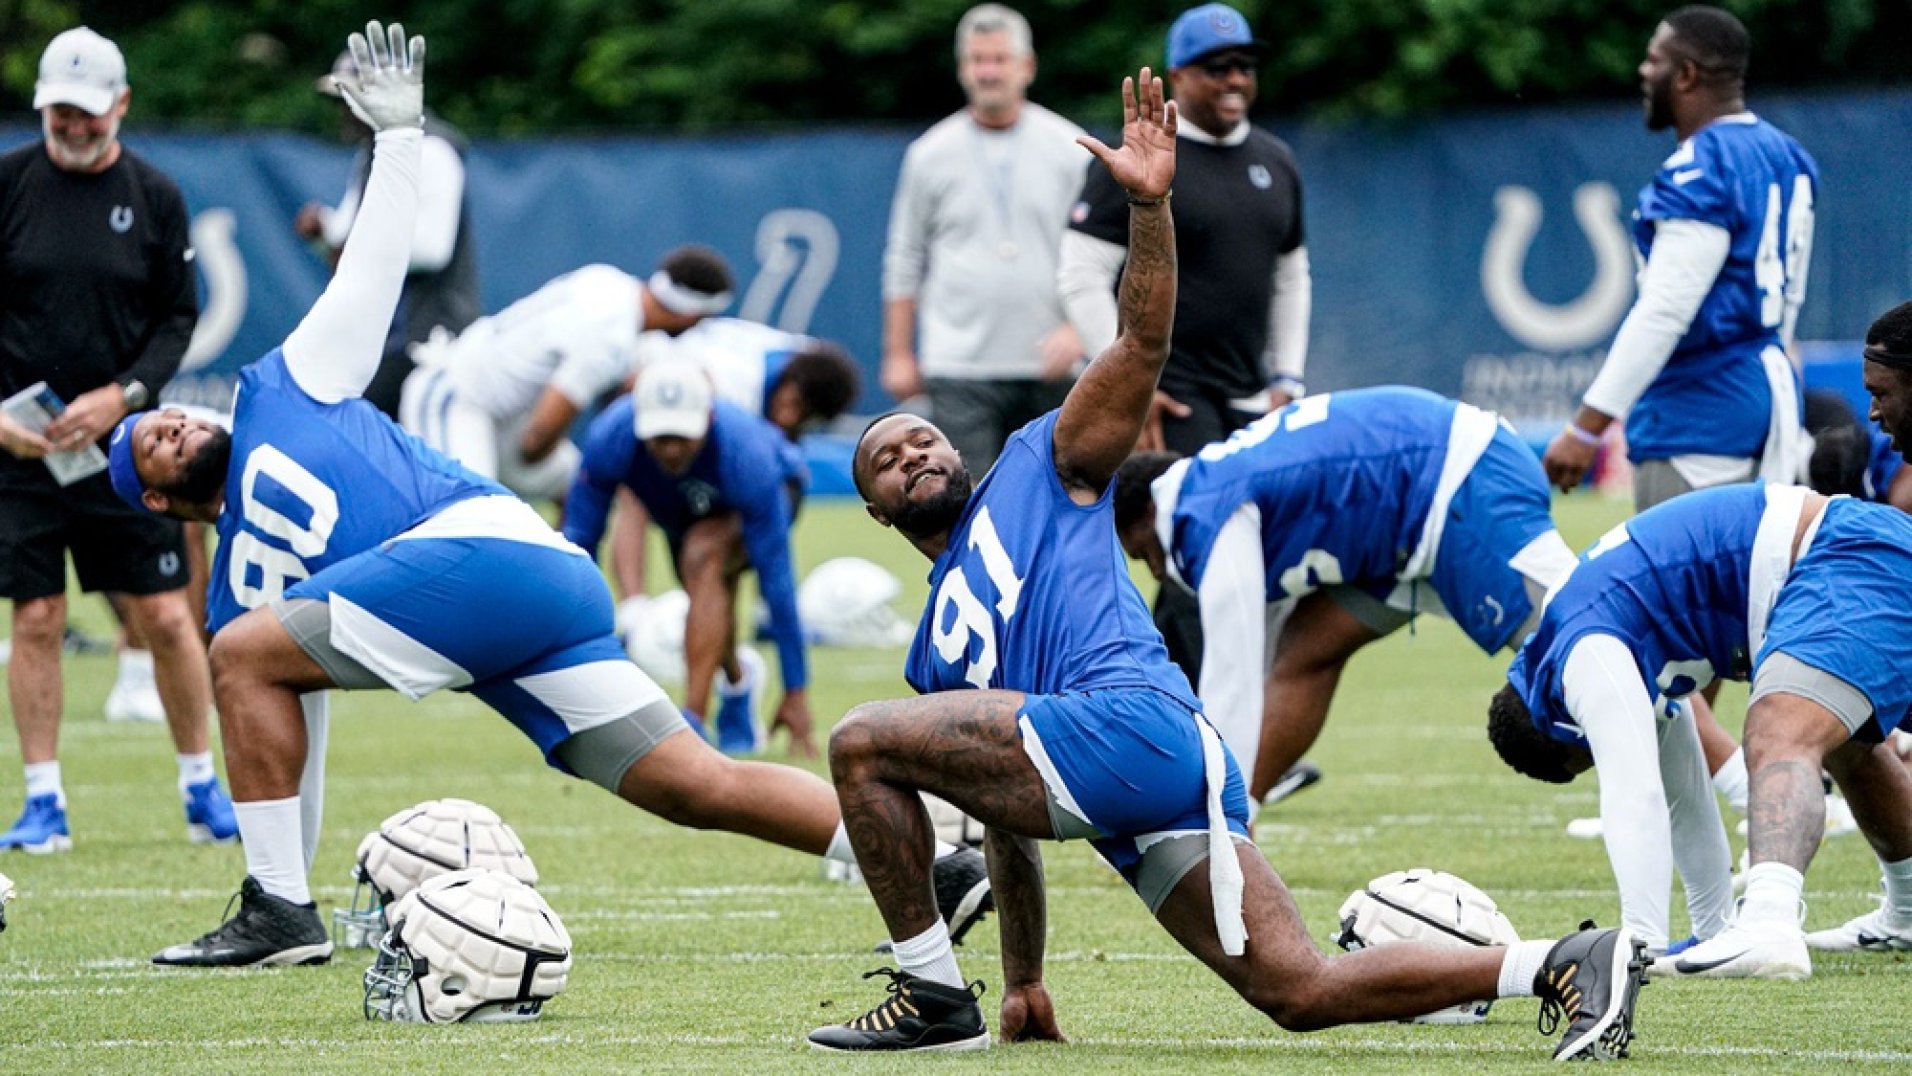 2022 NFL Training Camp Primer Schedules/key dates and offseason roster